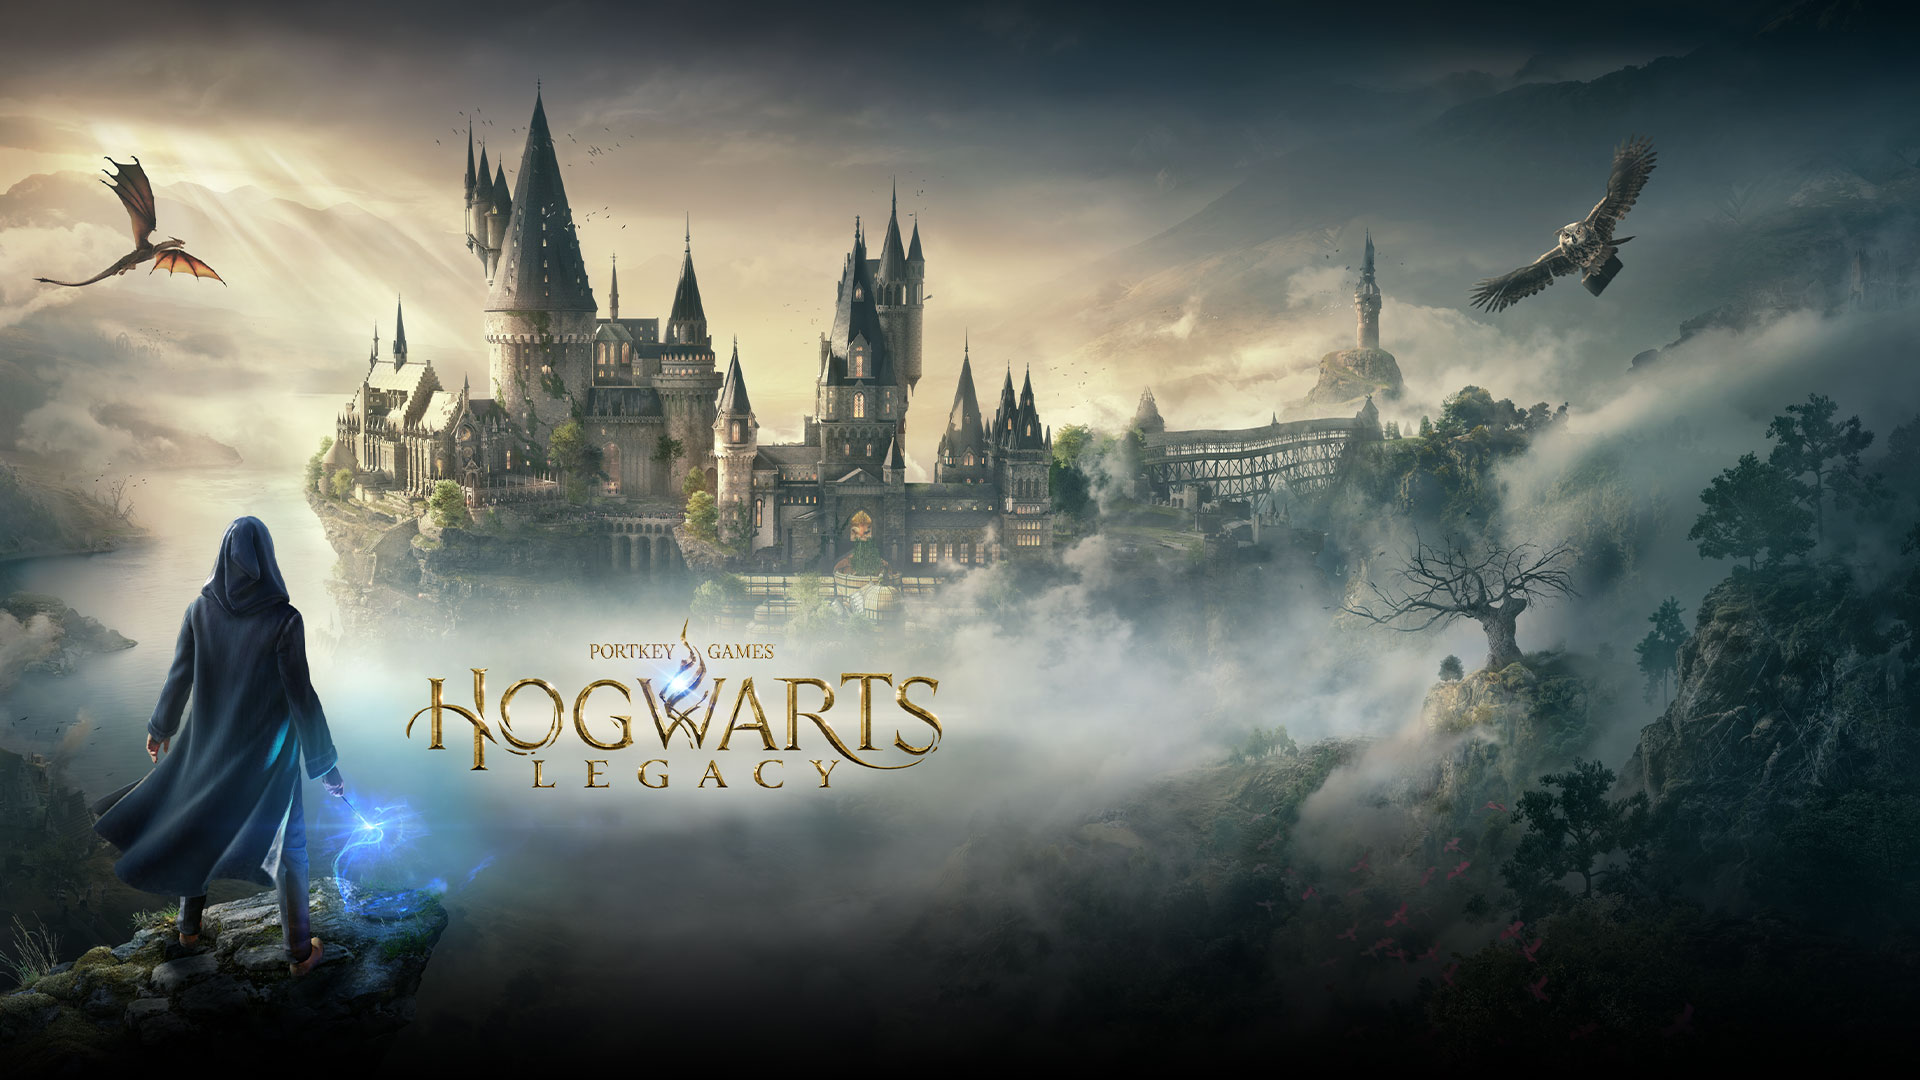 Hogwarts Legacy art book leaked and details about its duration come to light